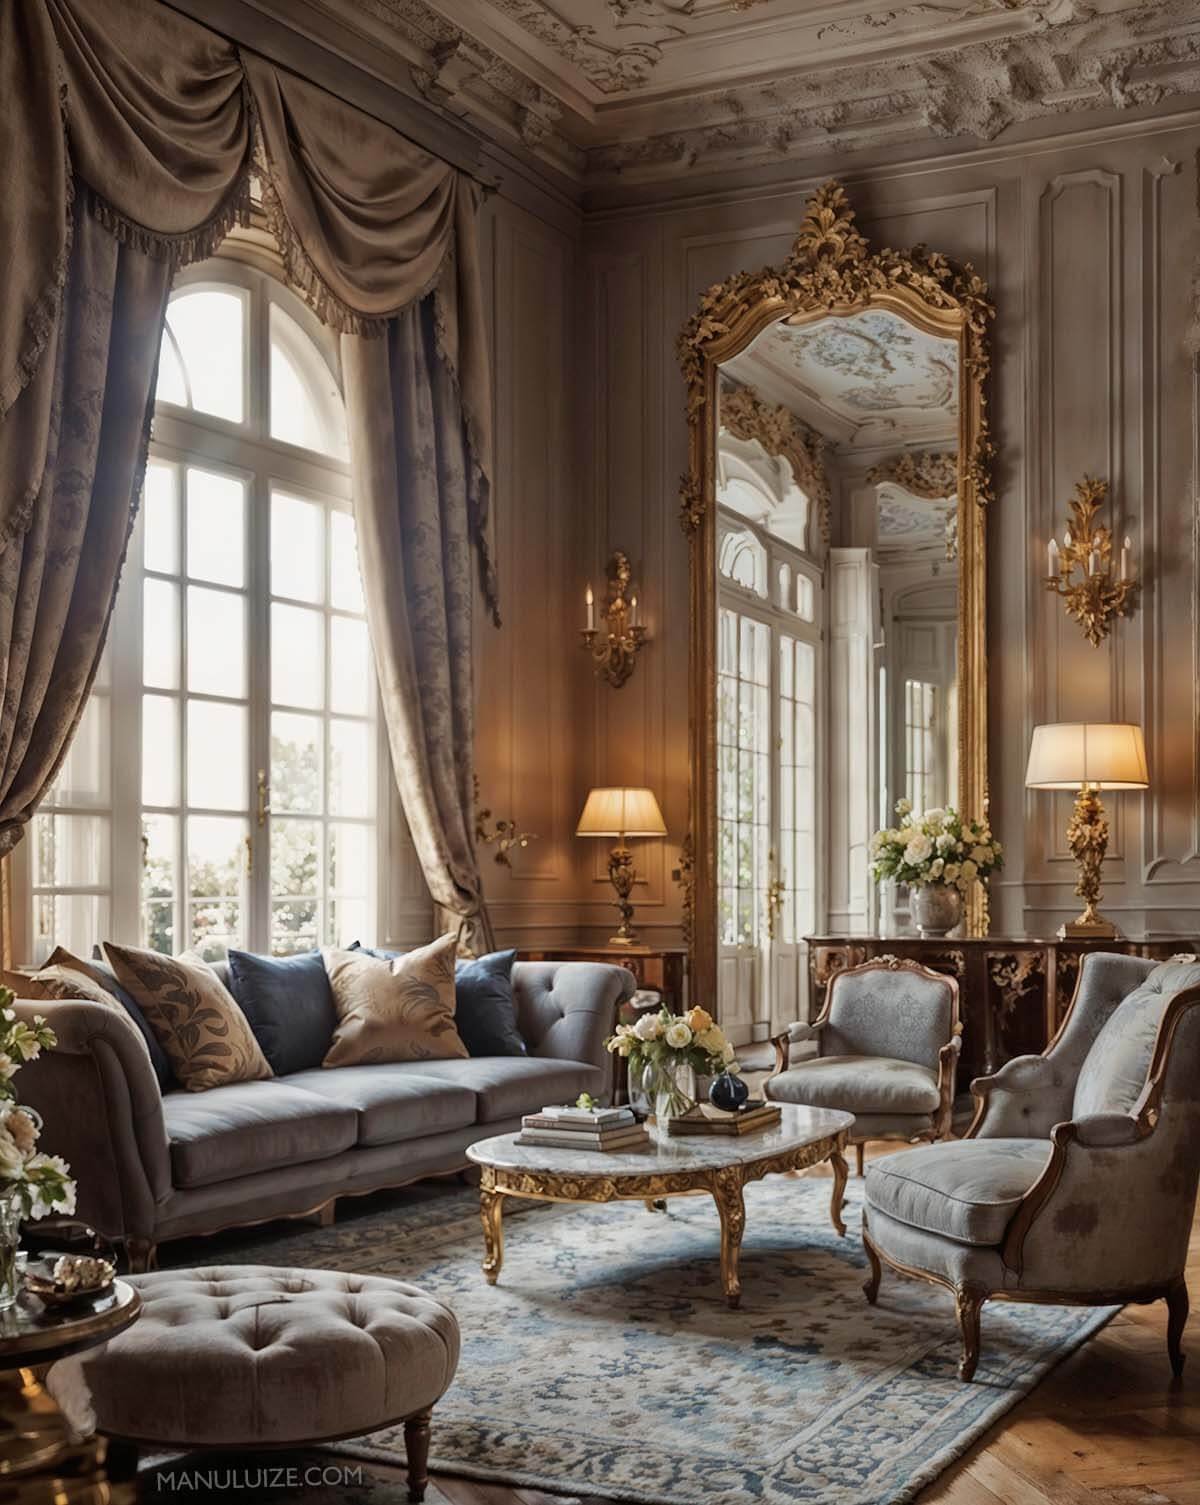 French style decor - living room